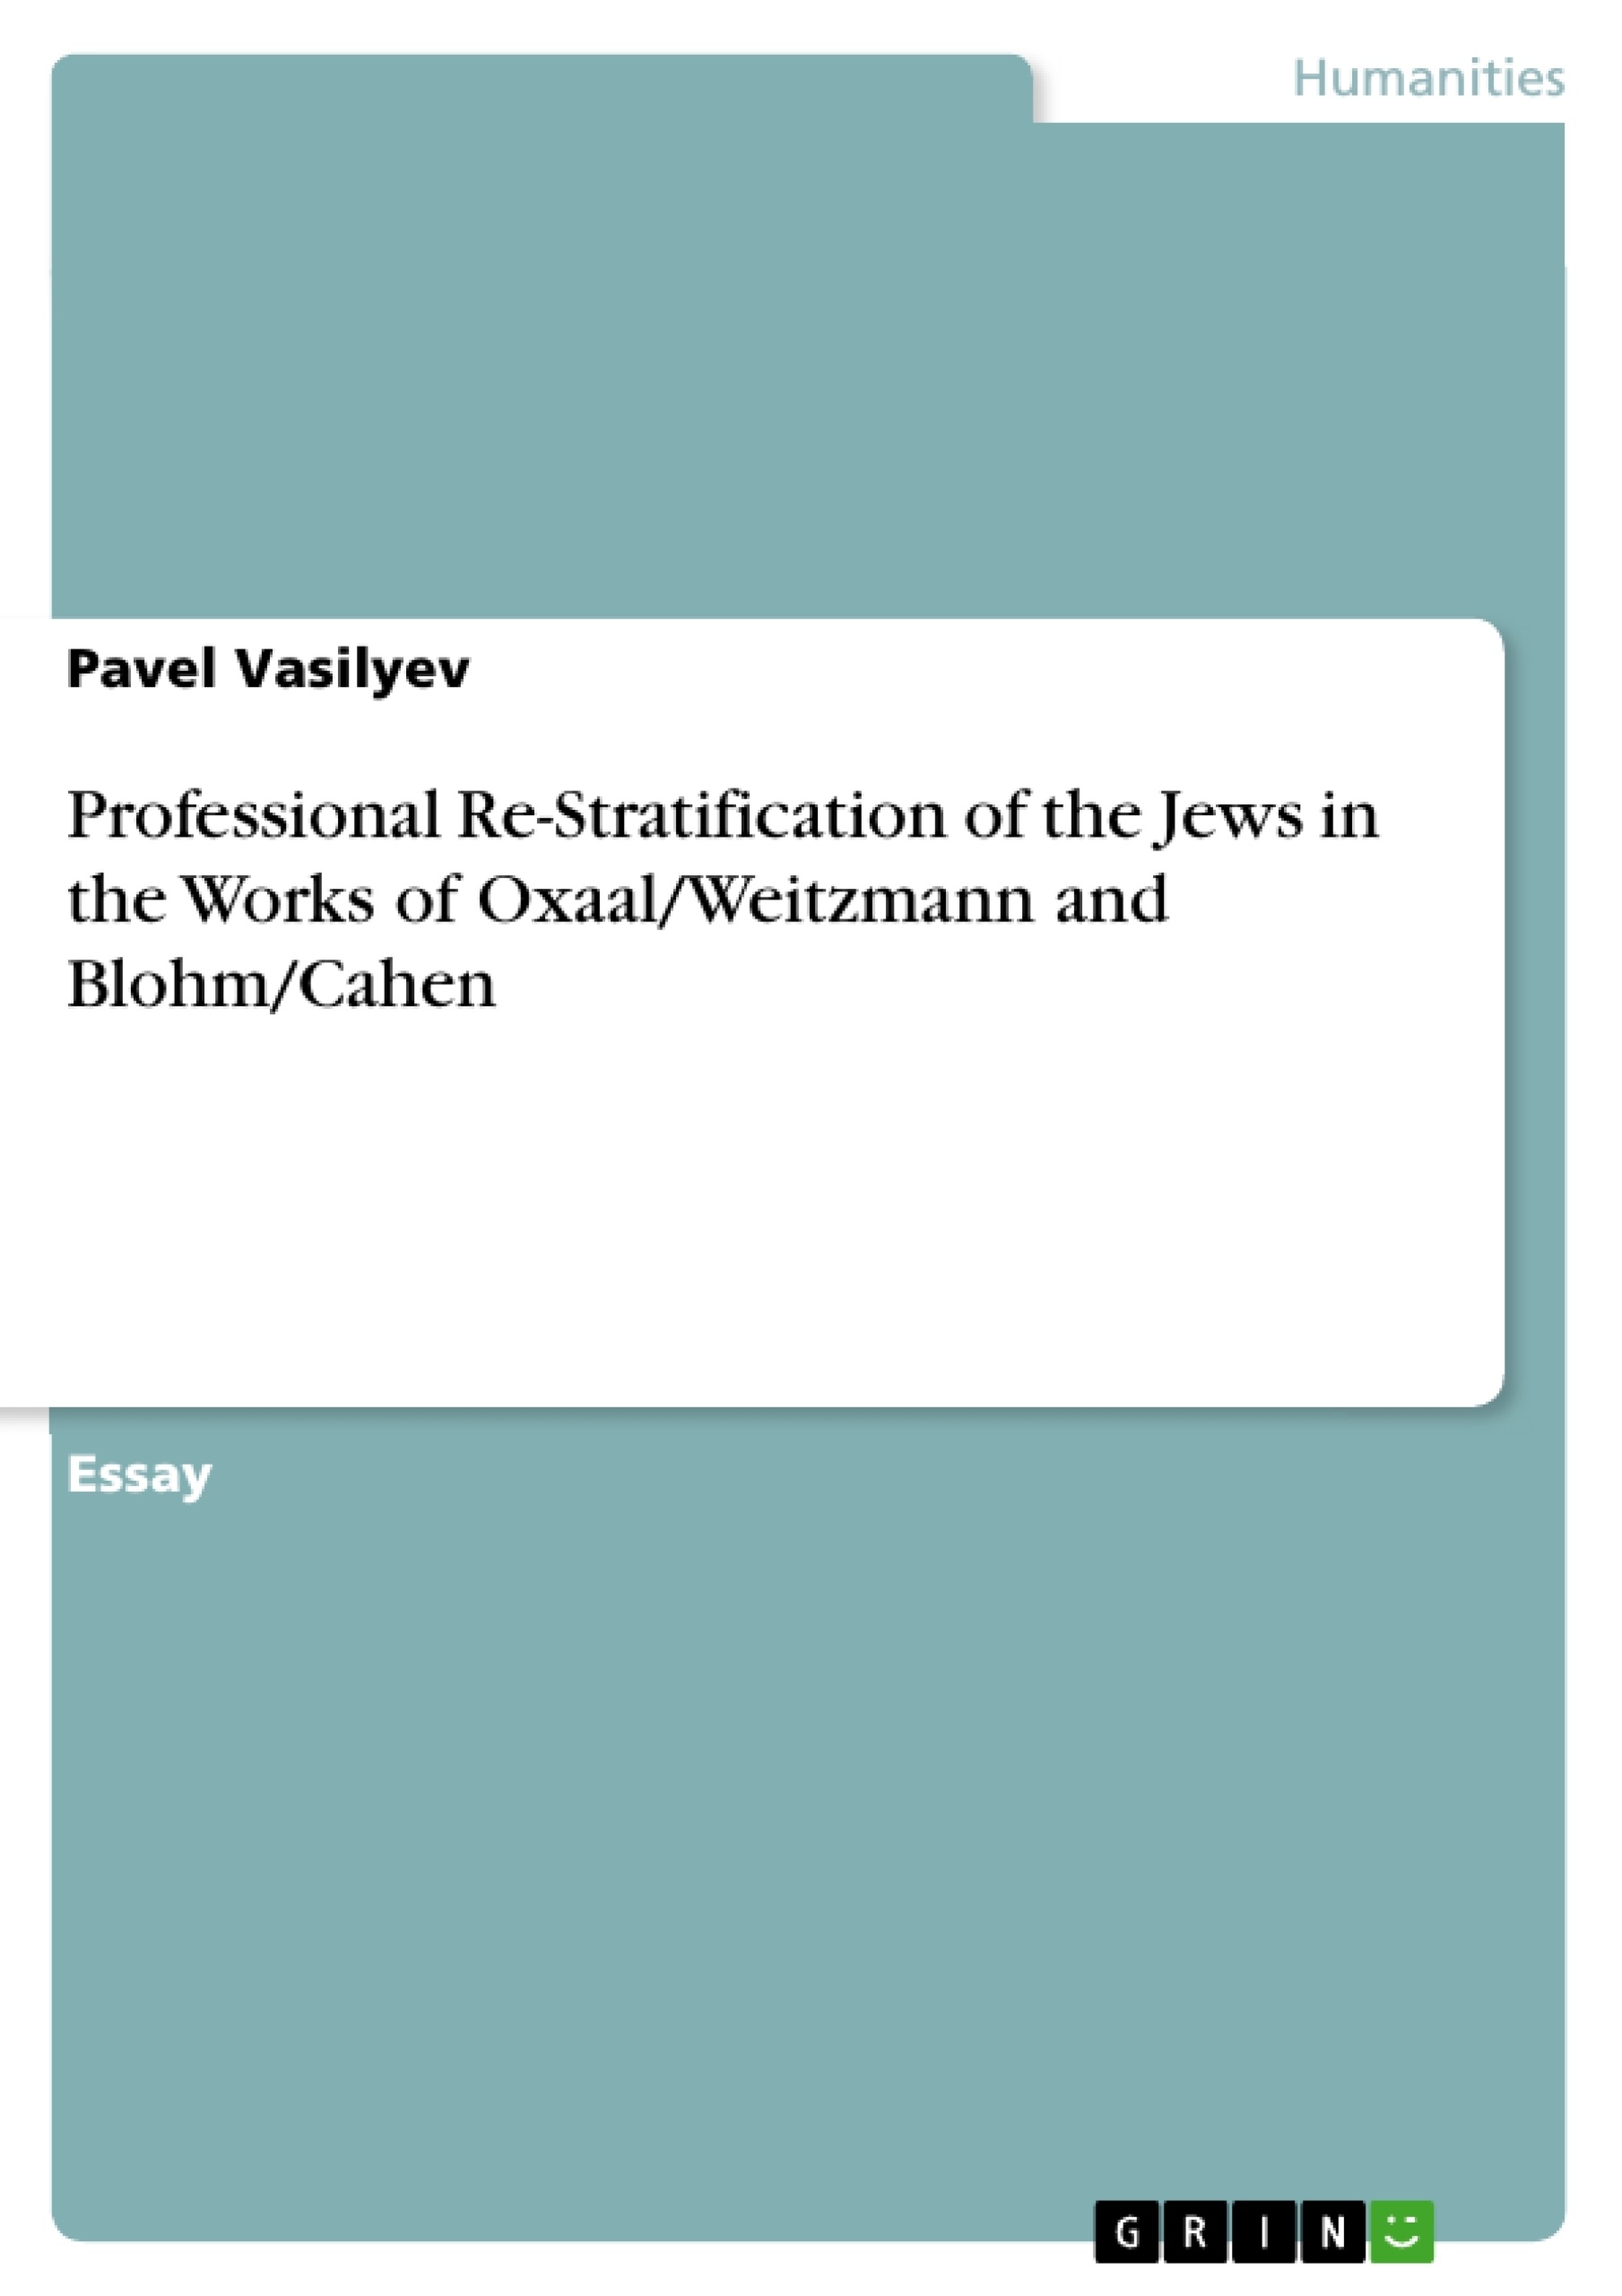 Titre: Professional Re-Stratification of the Jews in the Works of Oxaal/Weitzmann and Blohm/Cahen